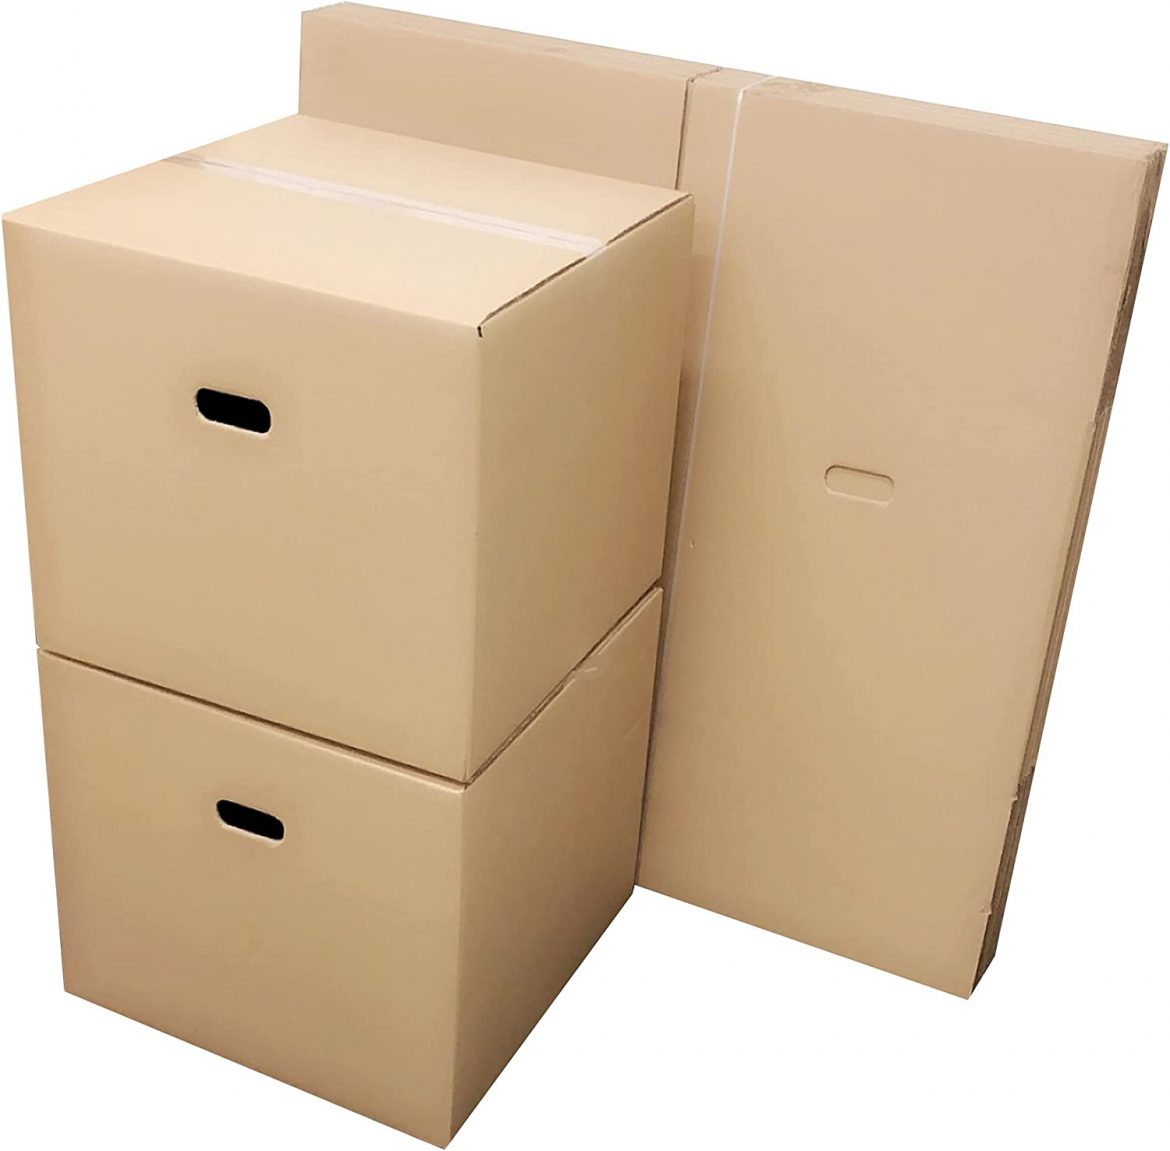 Different Factors of Cardboard Boxes for Moving House